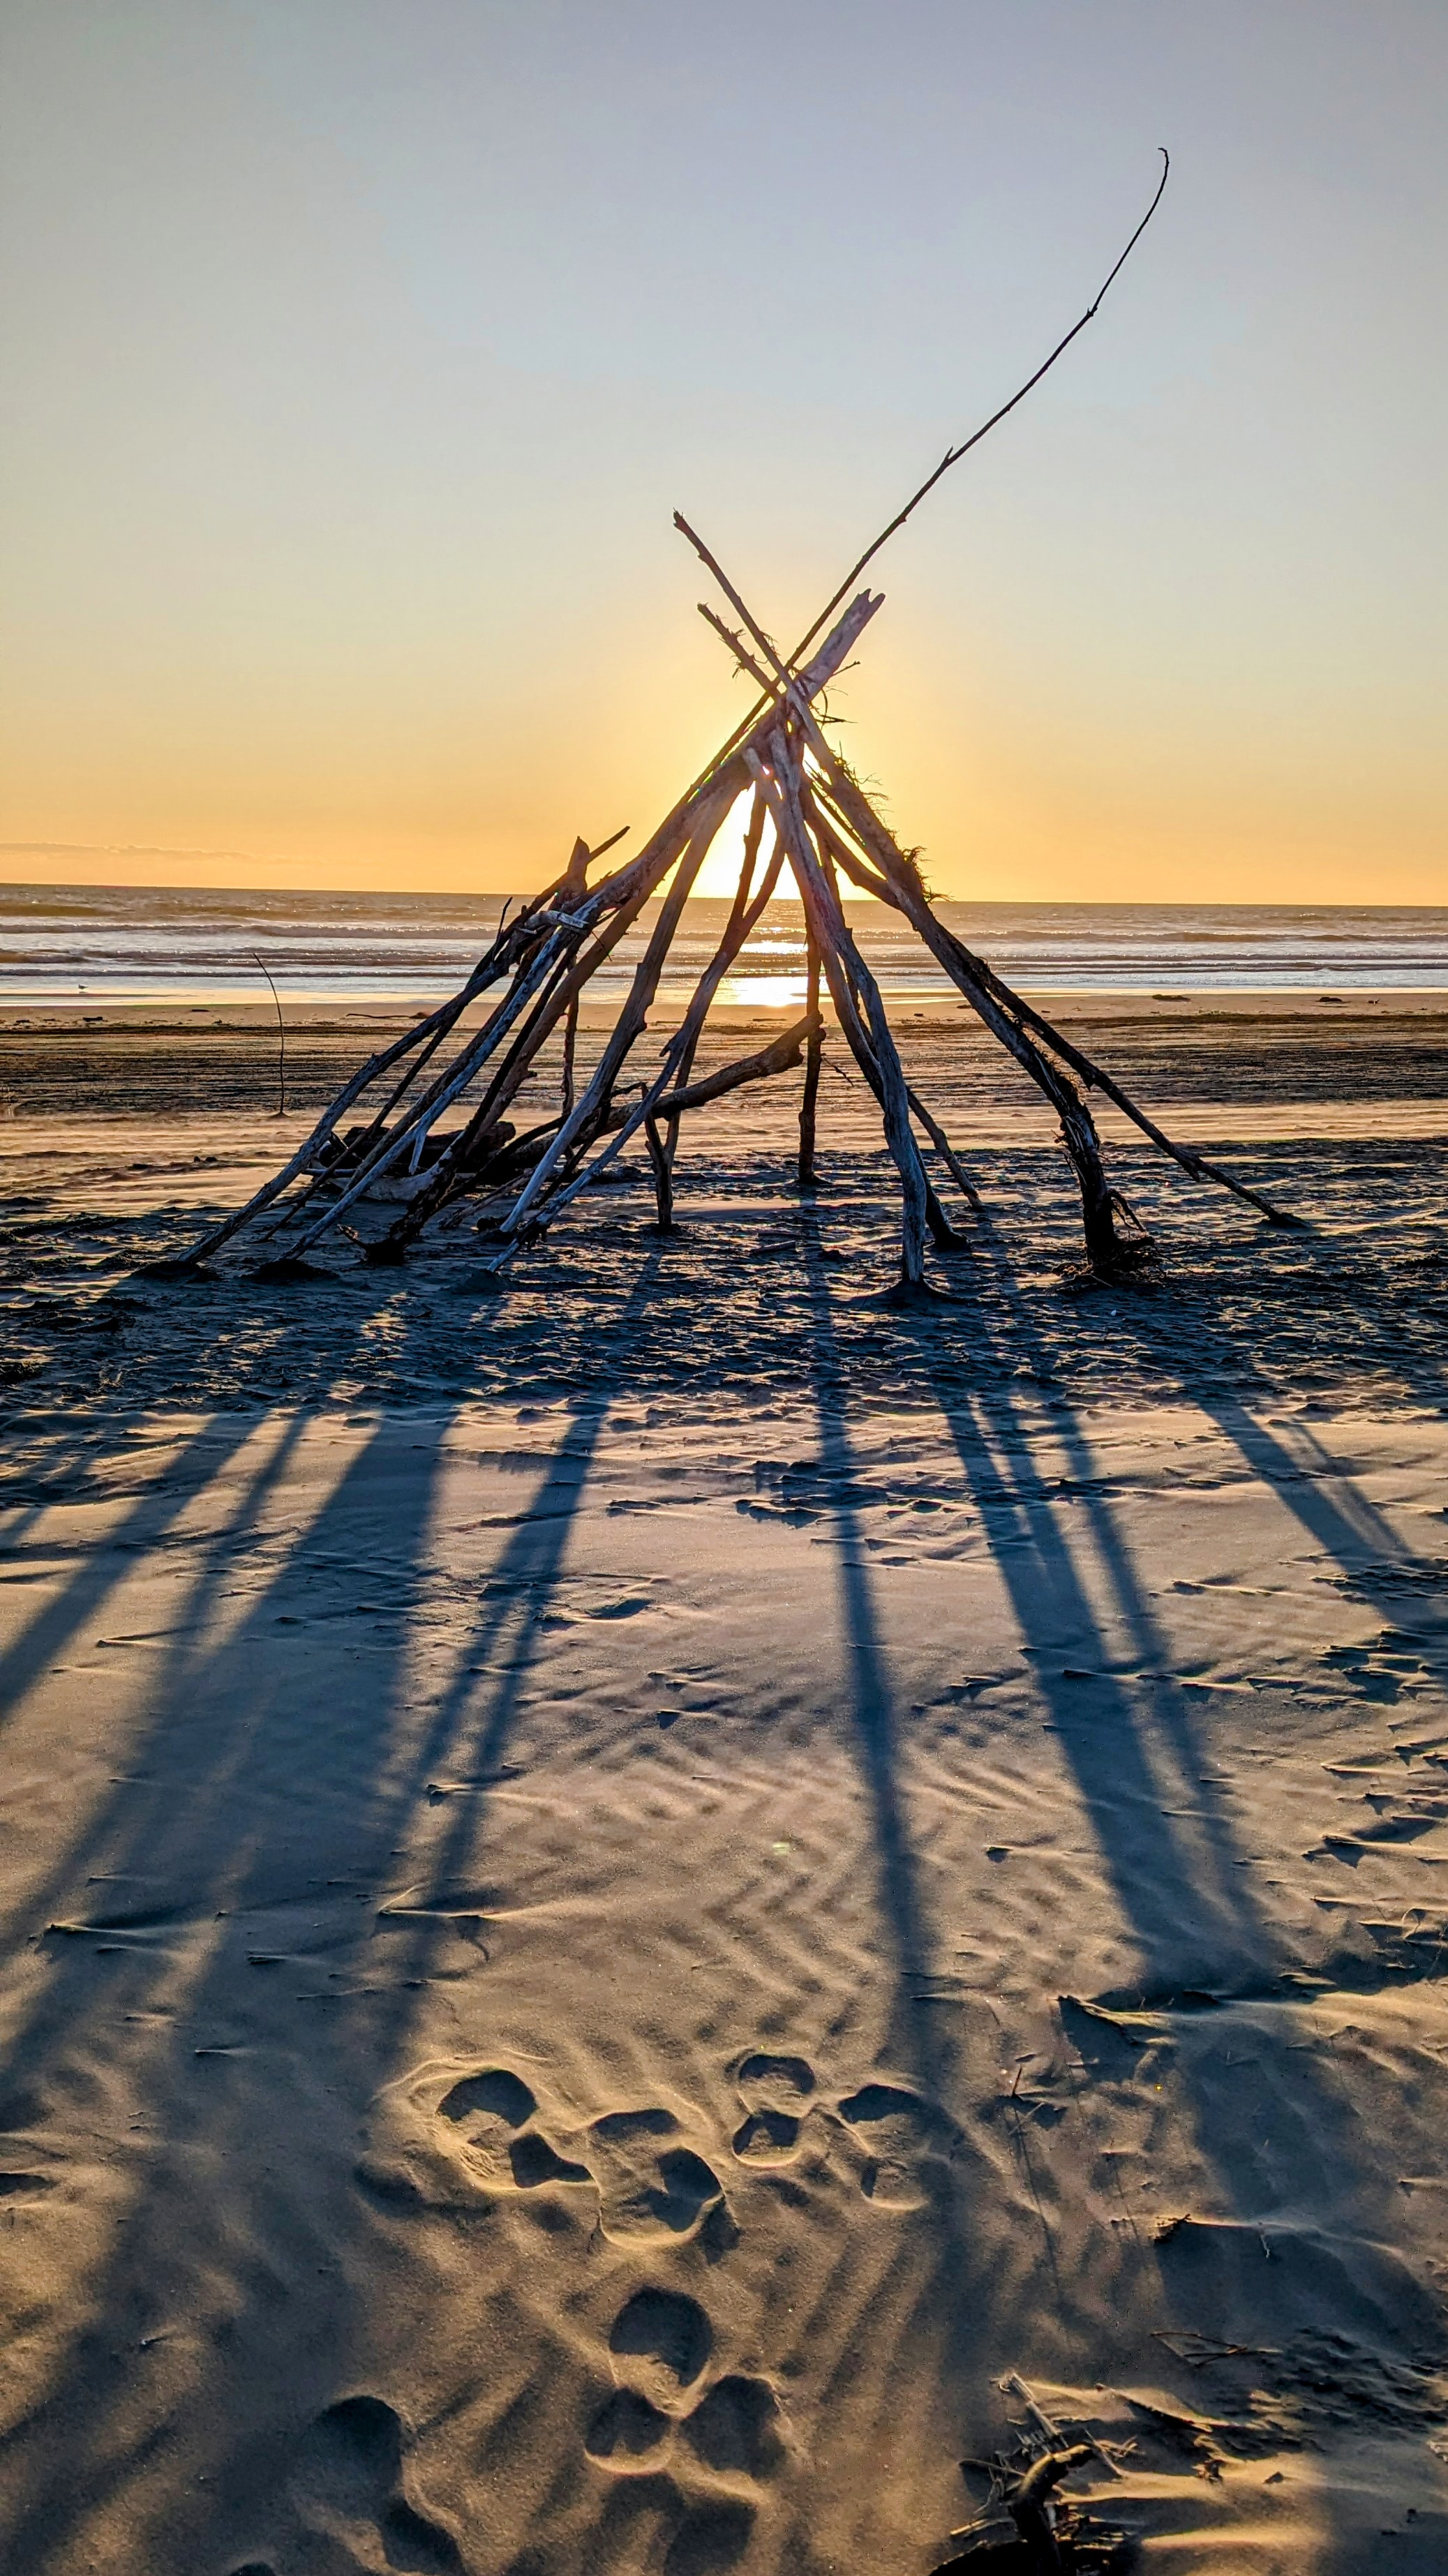 Calm beach sunset with the orange glow behind a makeshift driftwood teepee and it's elongated shadows coming towards the camera.